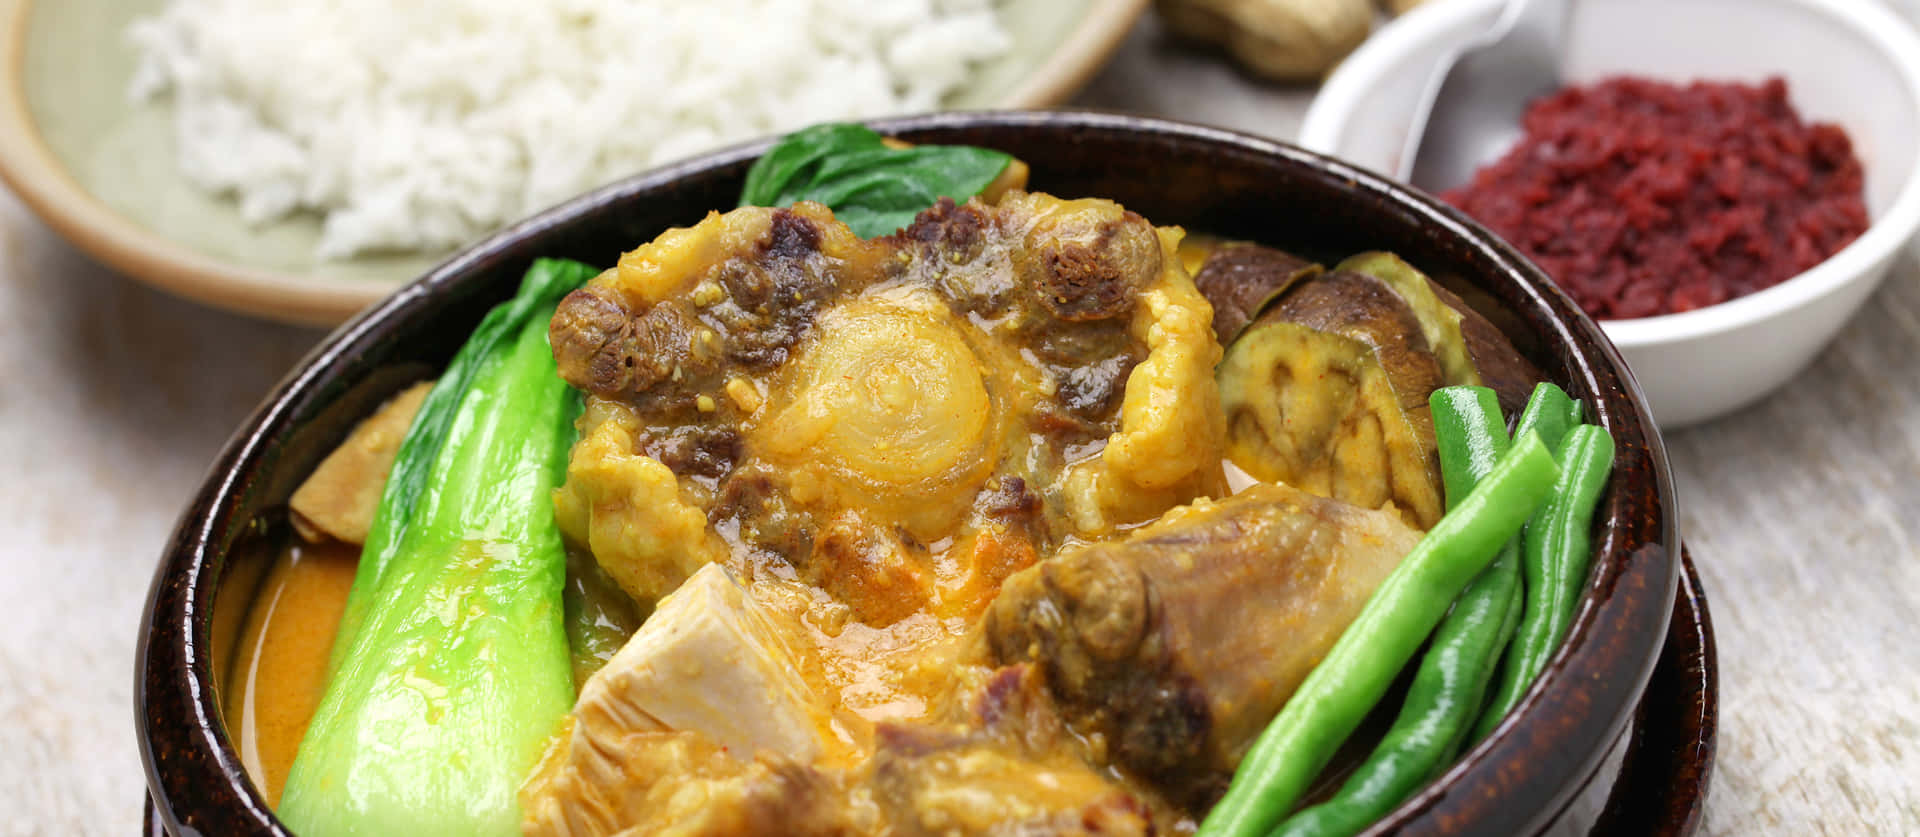 Sumptuous Meal With A Serving Of Rice And Kare-kare Picture